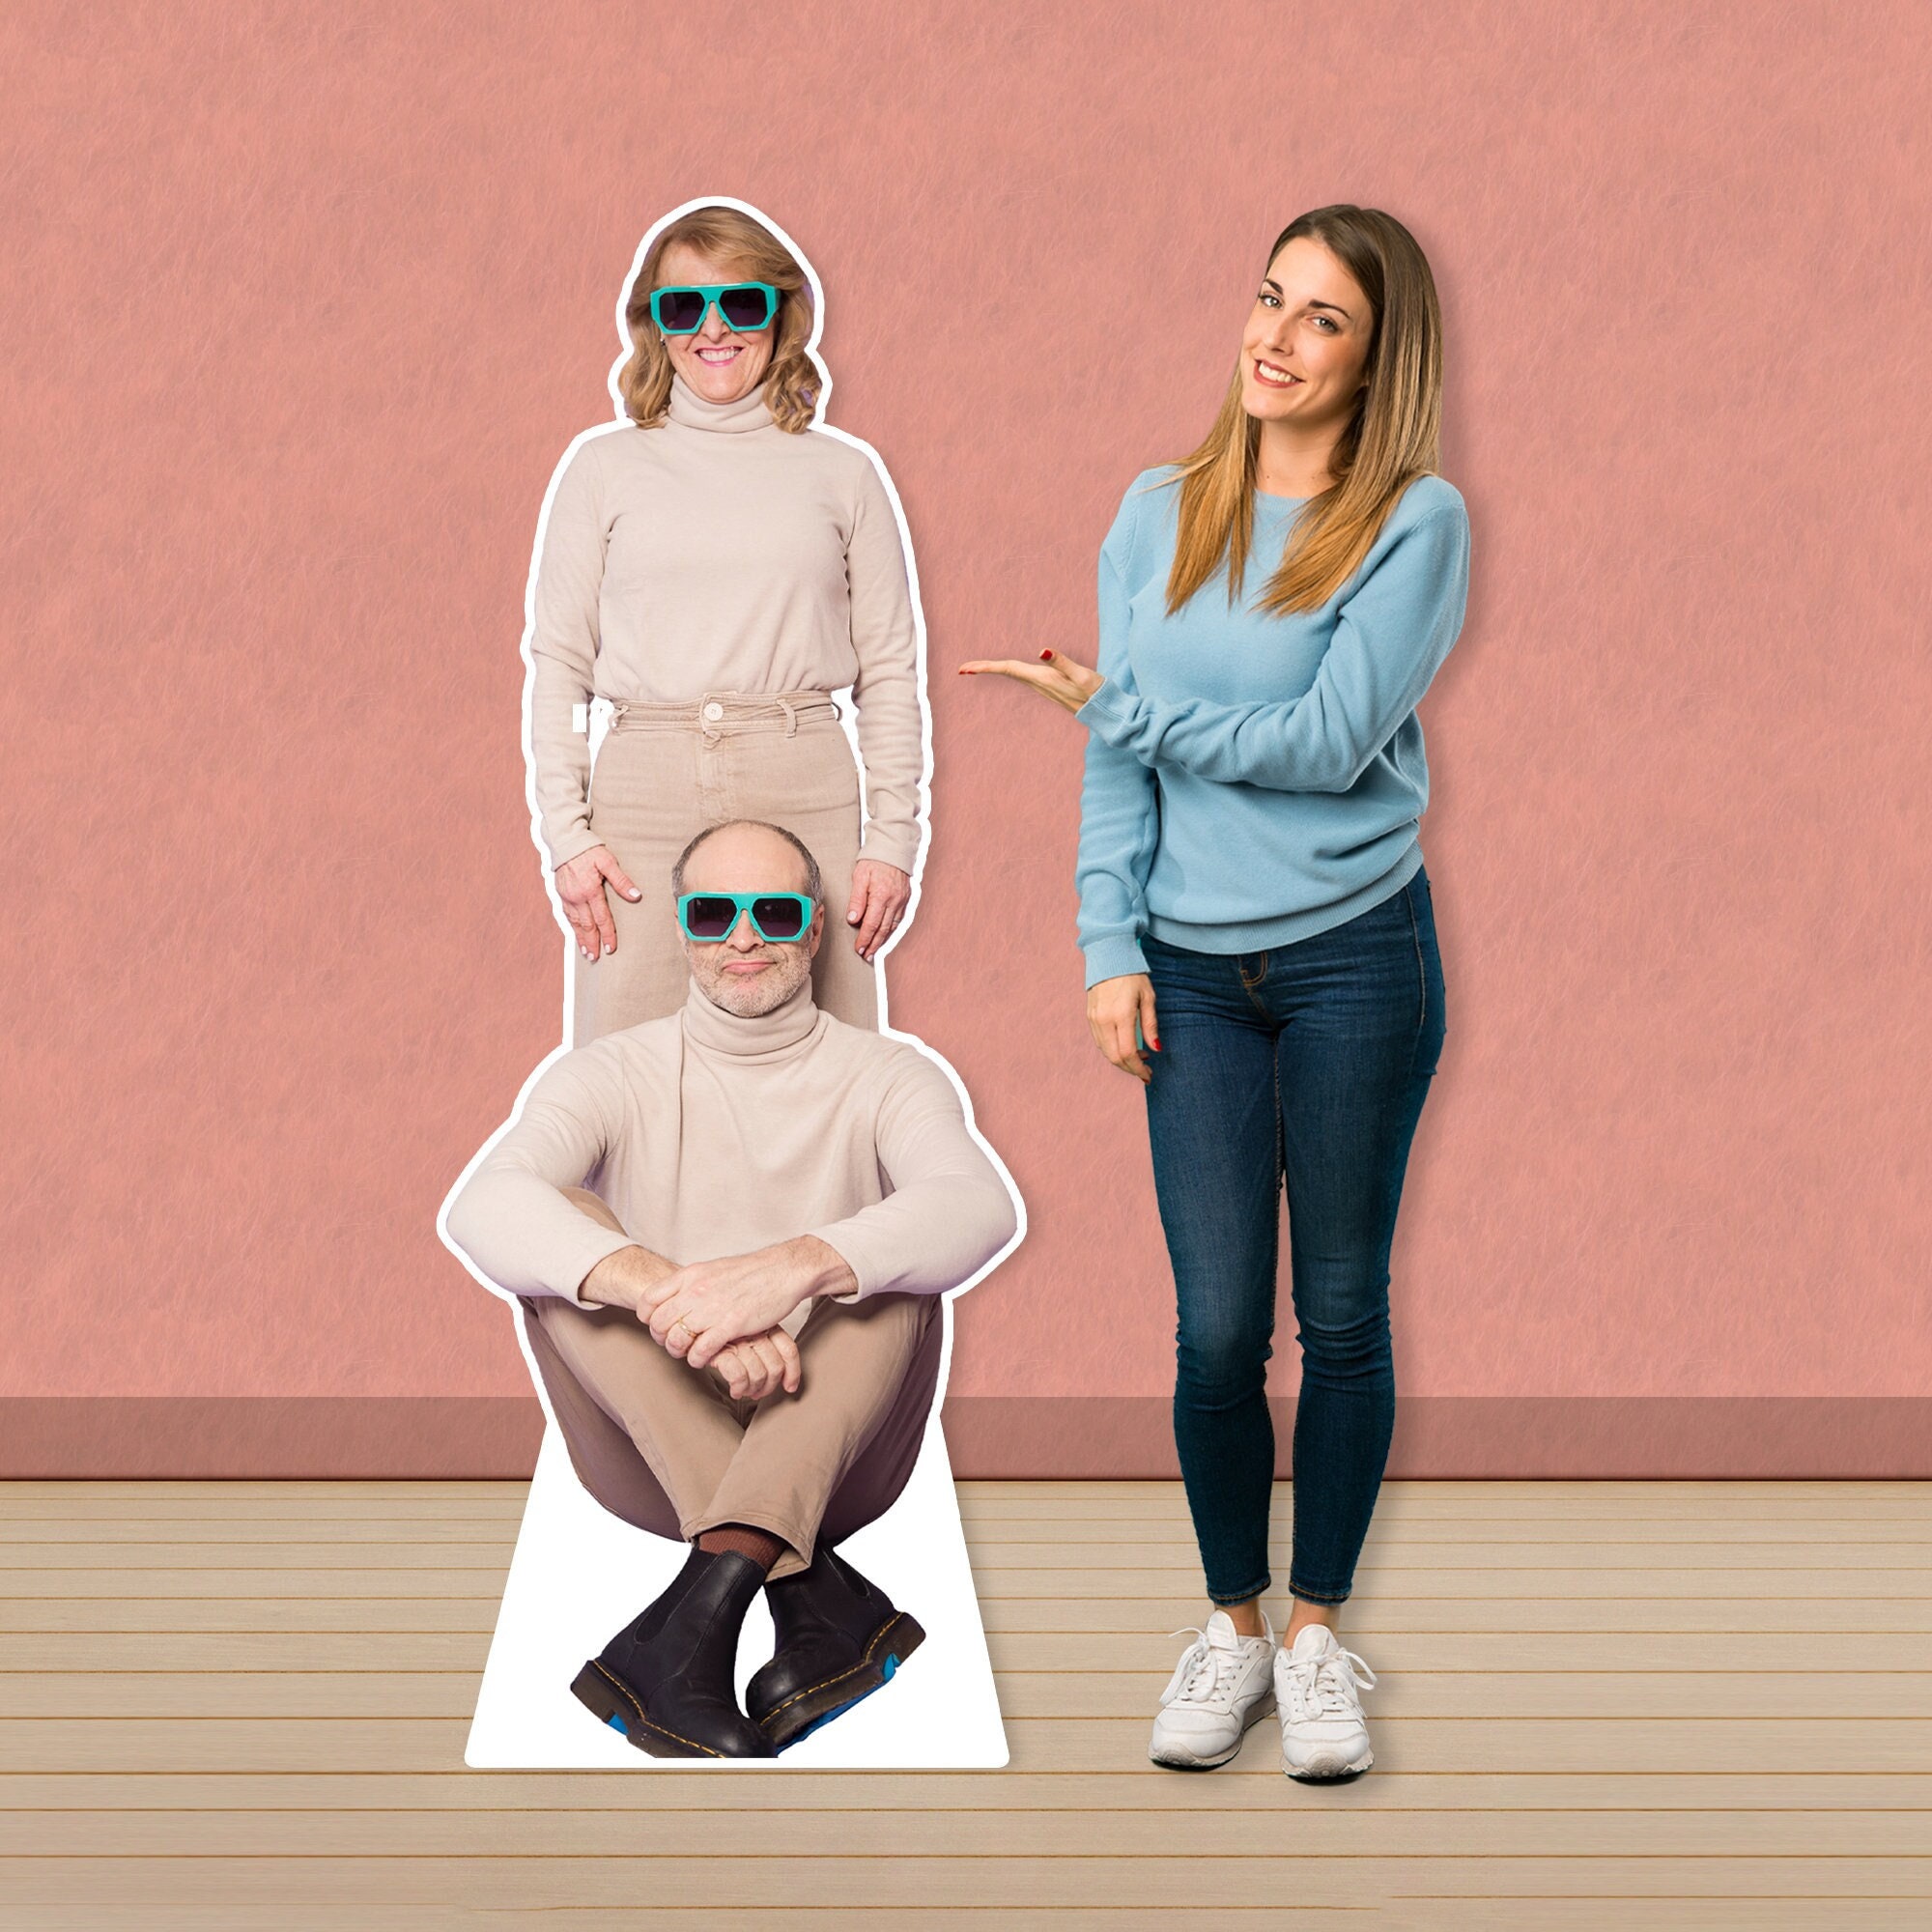 Custom Life Size Coroplast Cutouts of Any Photograph Personalized Full Body Standees Lifesize Standup Great for Parties and Special Events